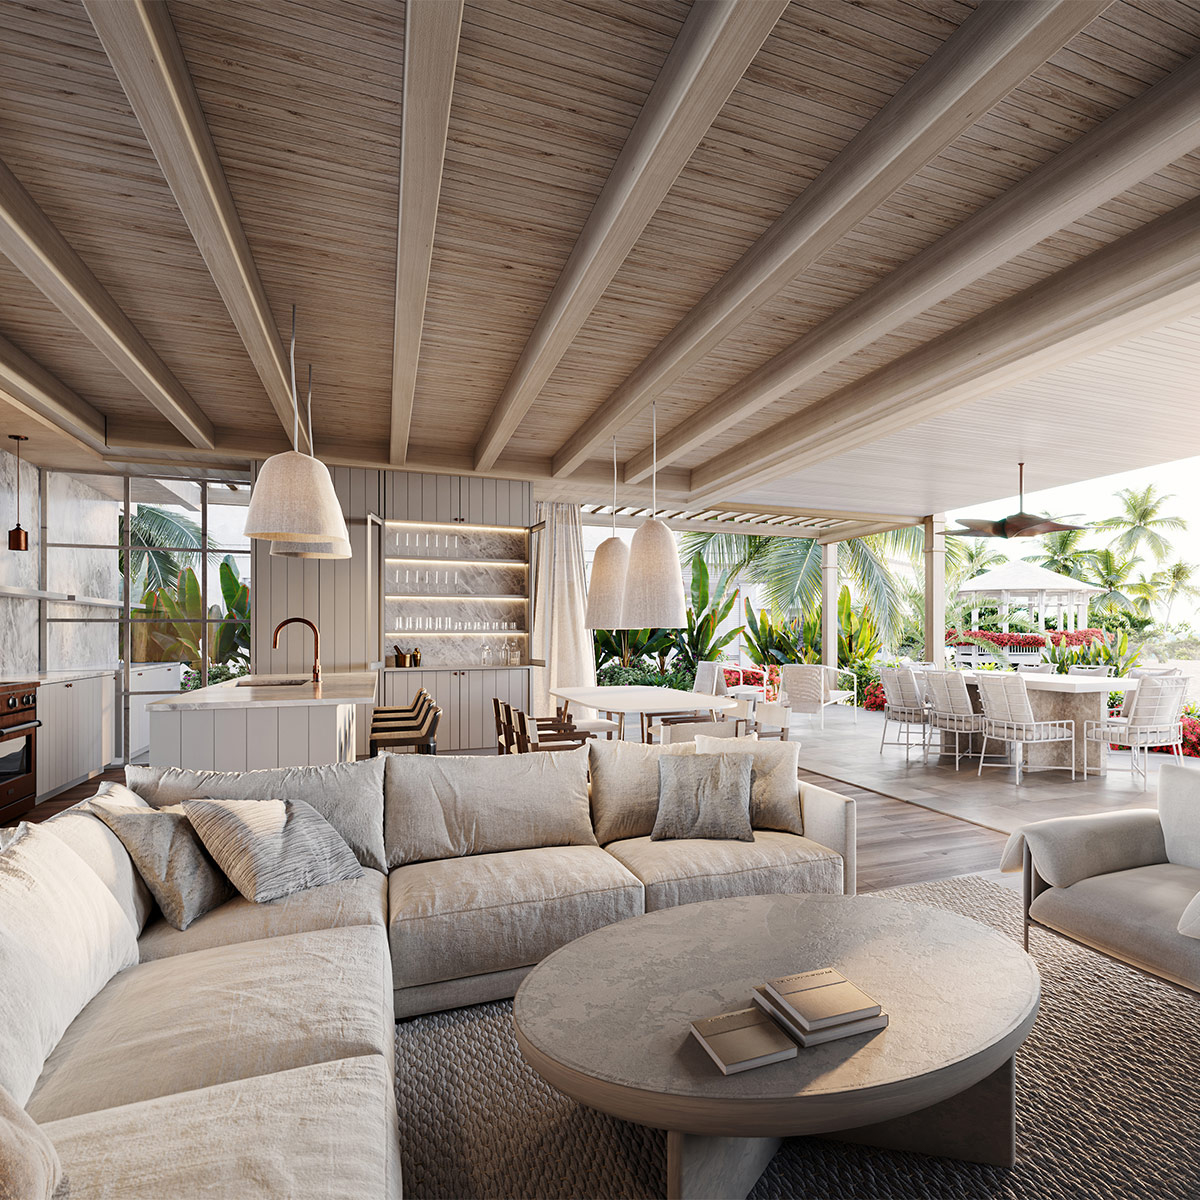 Elegant interior living space with a plush sofa, exemplifying the luxurious coastal living at The Abaco Club.